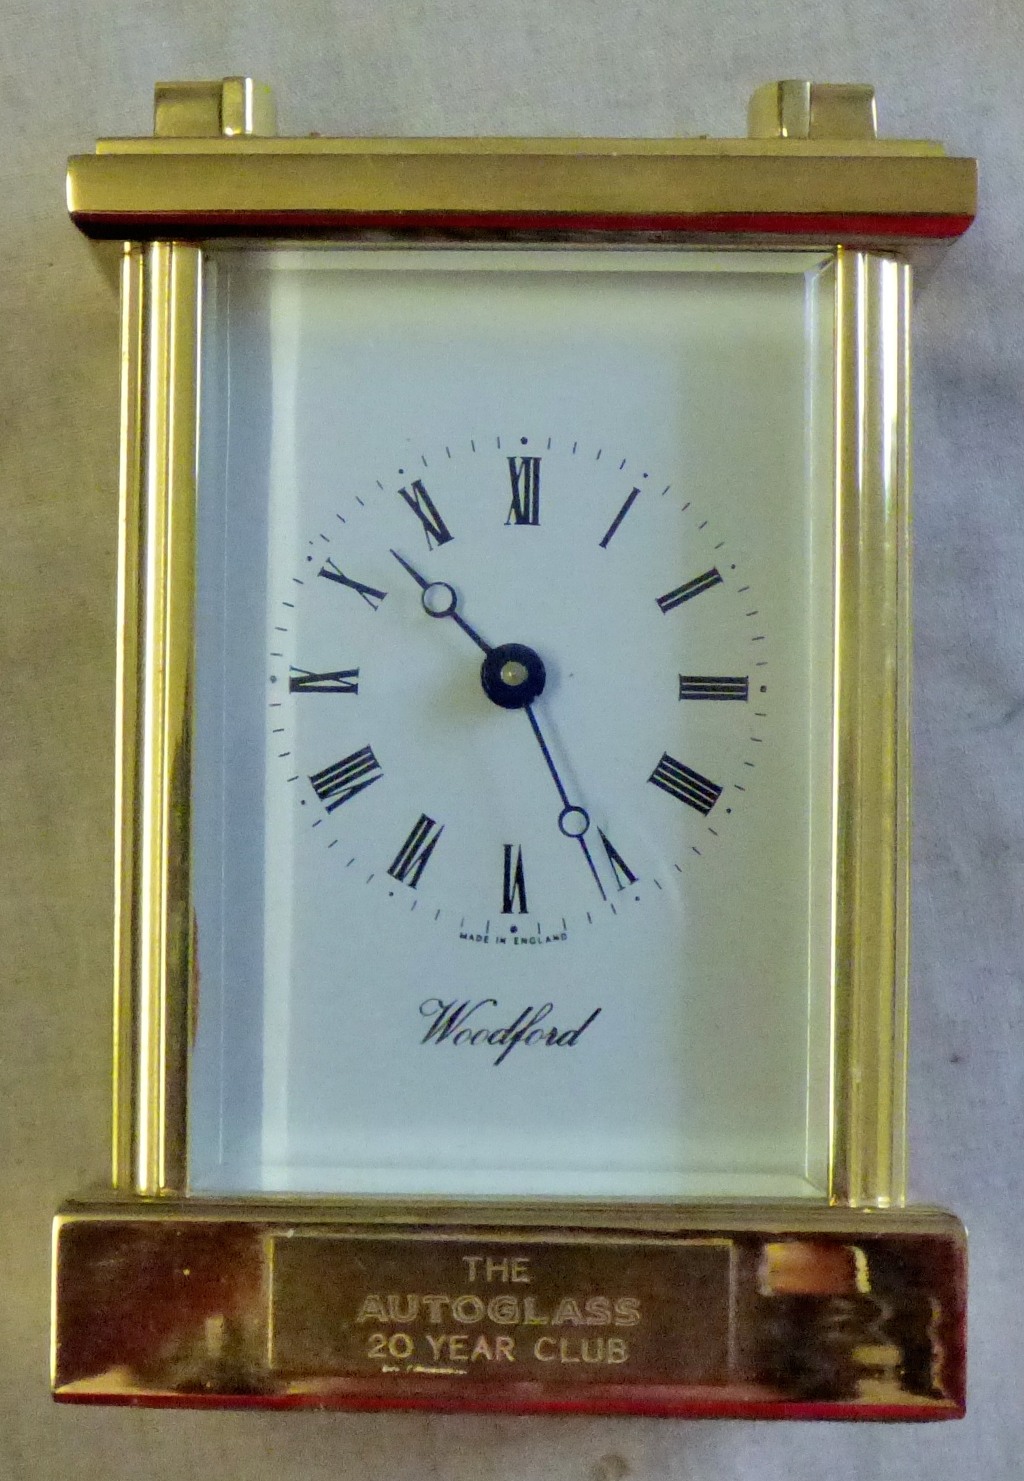 Good looking carriage clock- Woodford of England, seven jewel, appears in good order, but needs some - Image 2 of 8